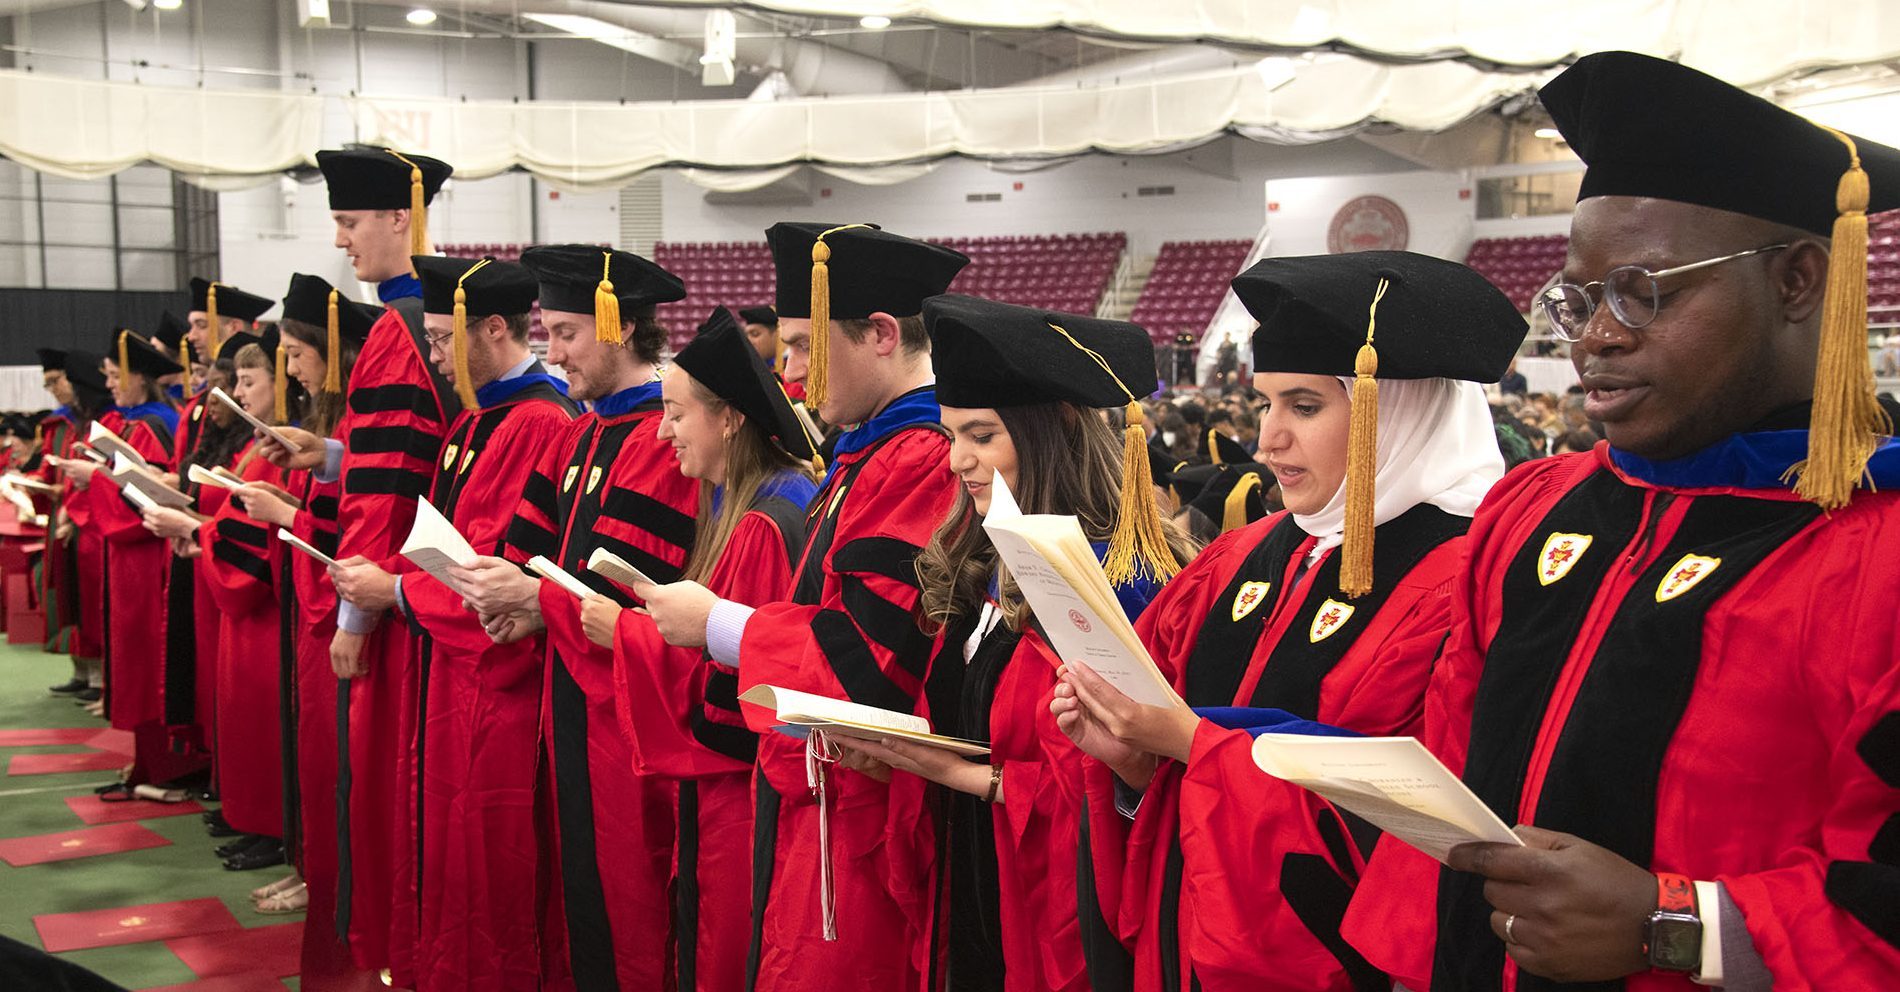 PhD graduates standing reading Oath of the Scientist after being hooded